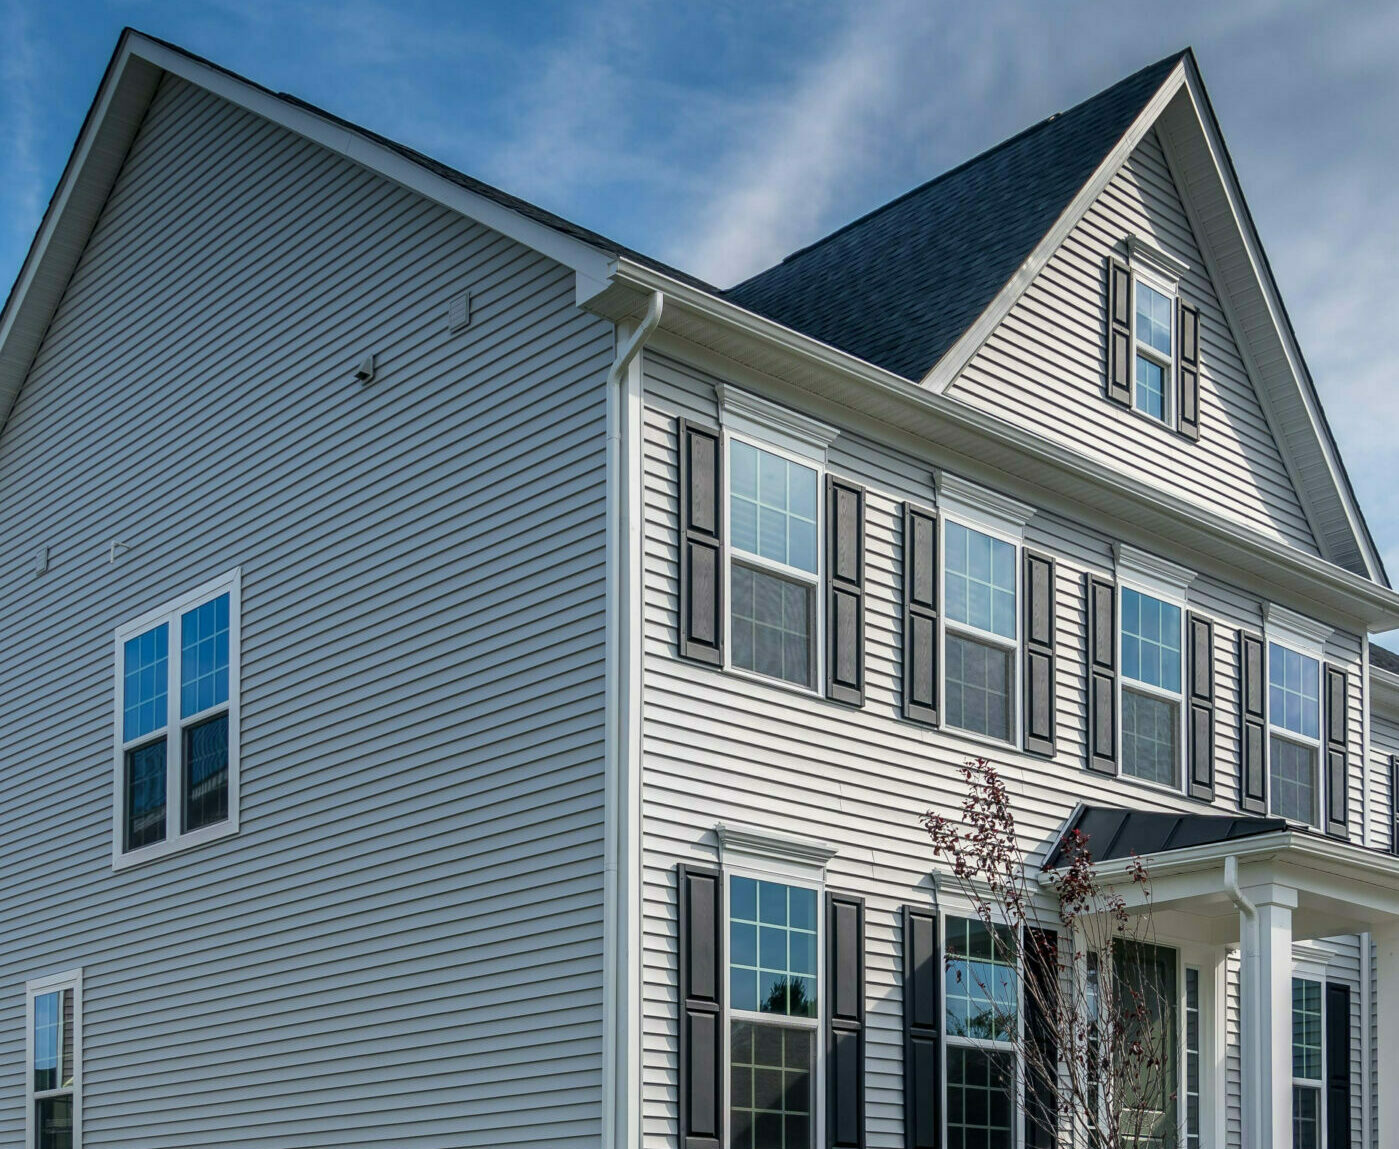 Discover the lighter side of residential siding repair in our latest blog post. Learn, laugh, and get expert advice today!